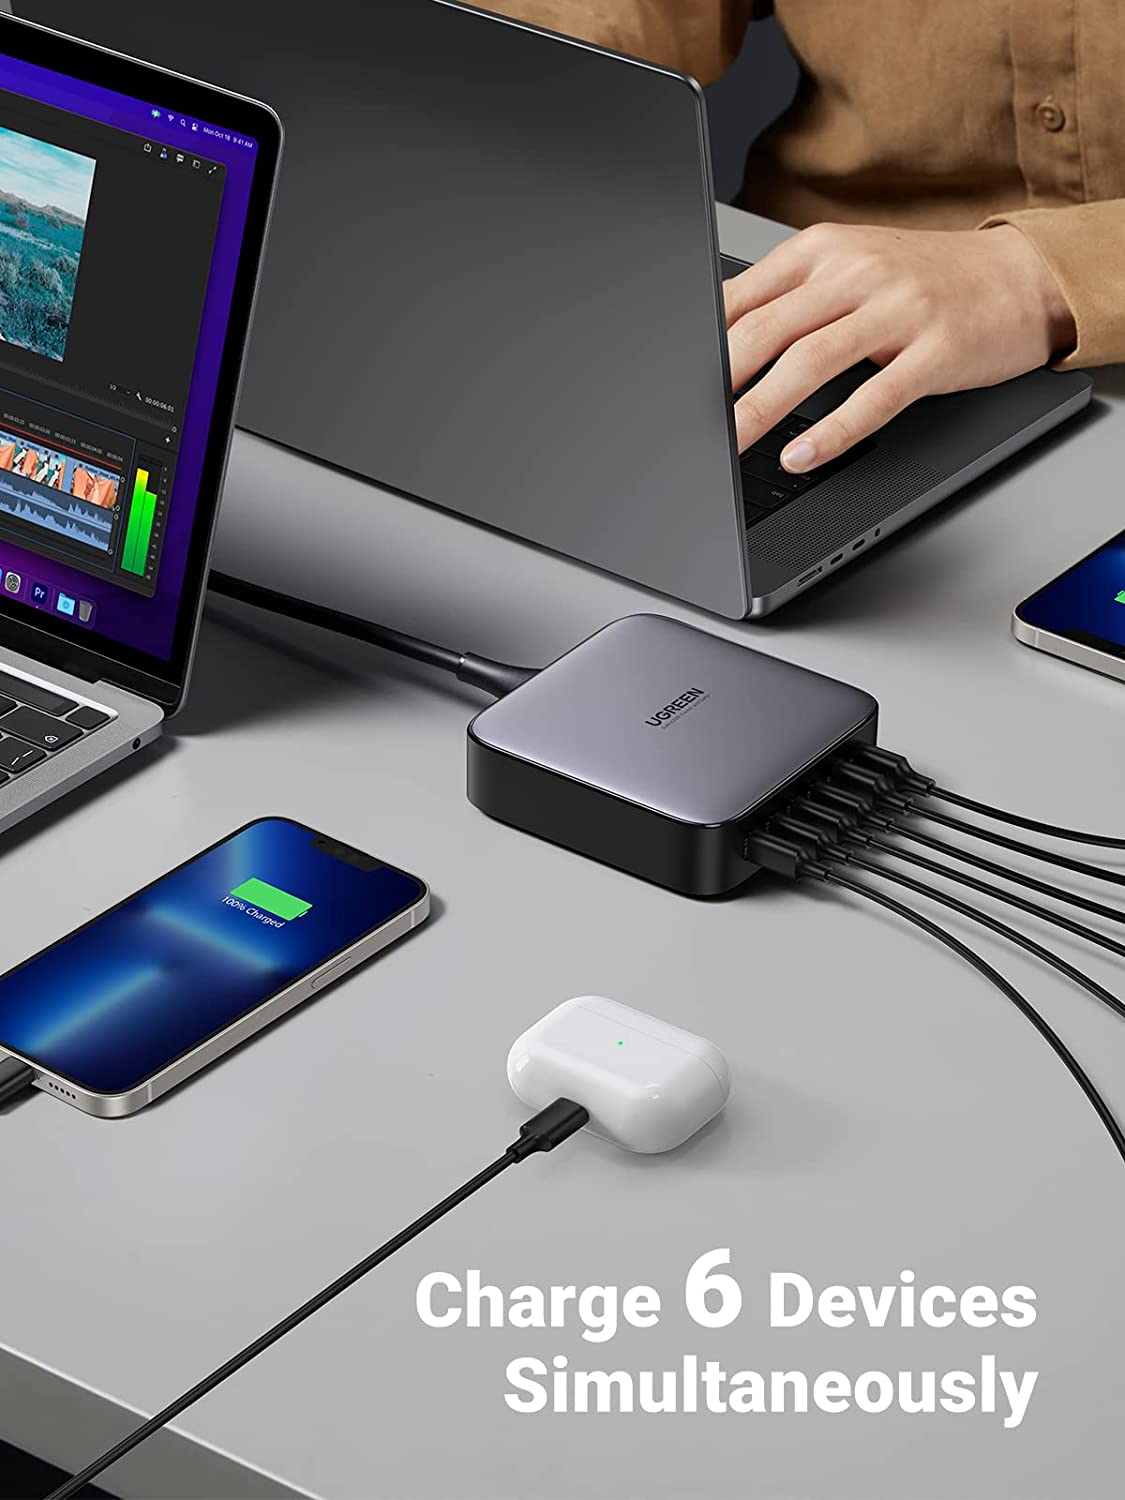 200W USB C Desktop Charger - 6 Ports GaN Power Adapter & Fast Charging  Station